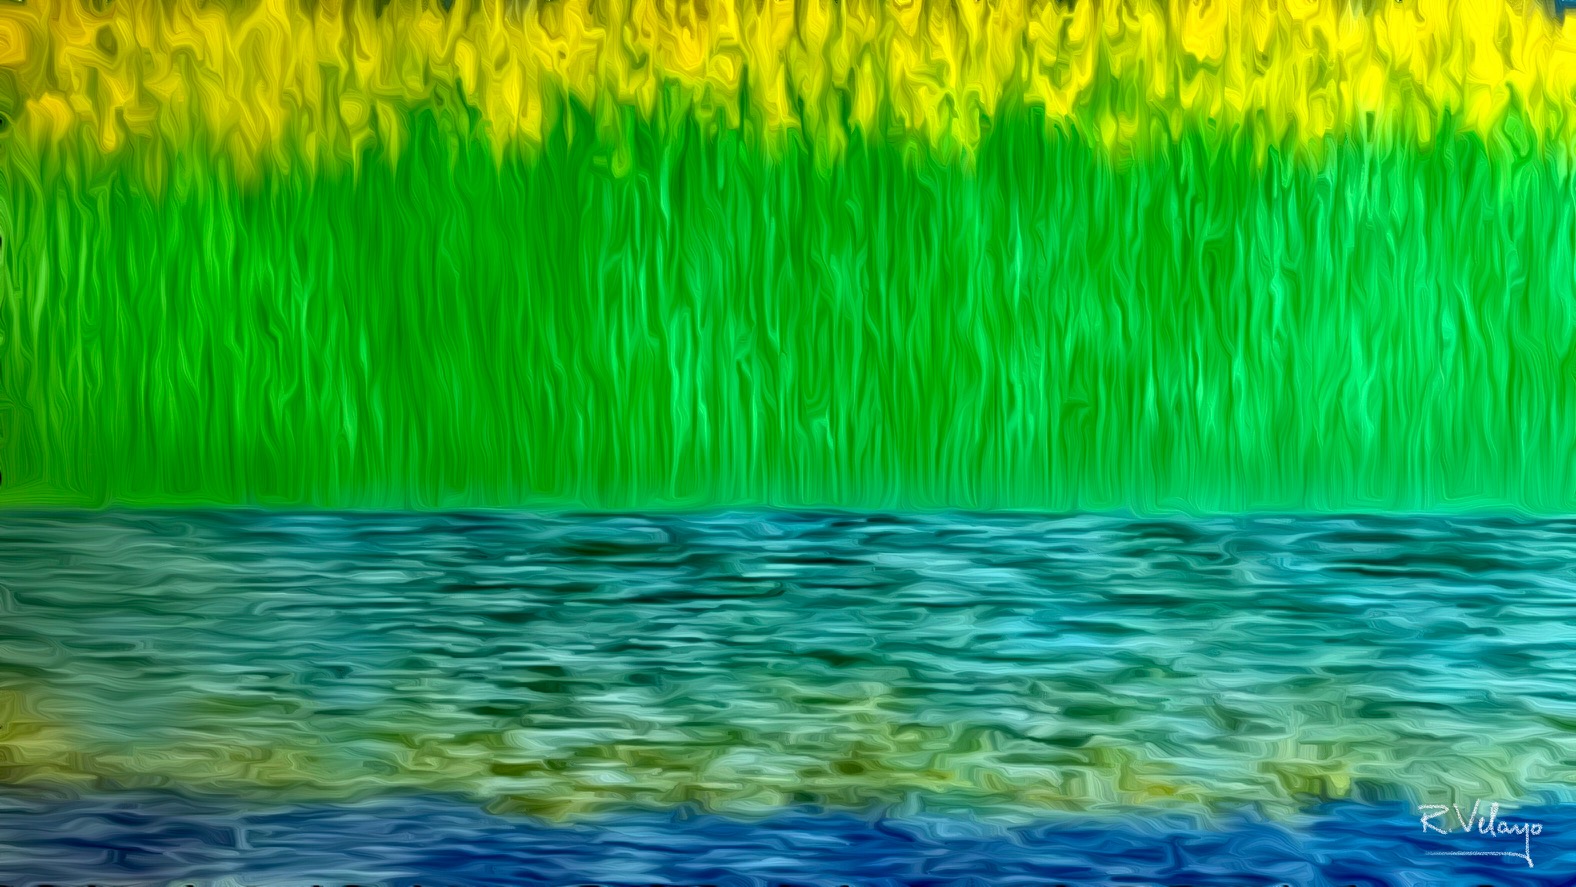 "FIELD AND RIVER" [Created: 7/14/2022]